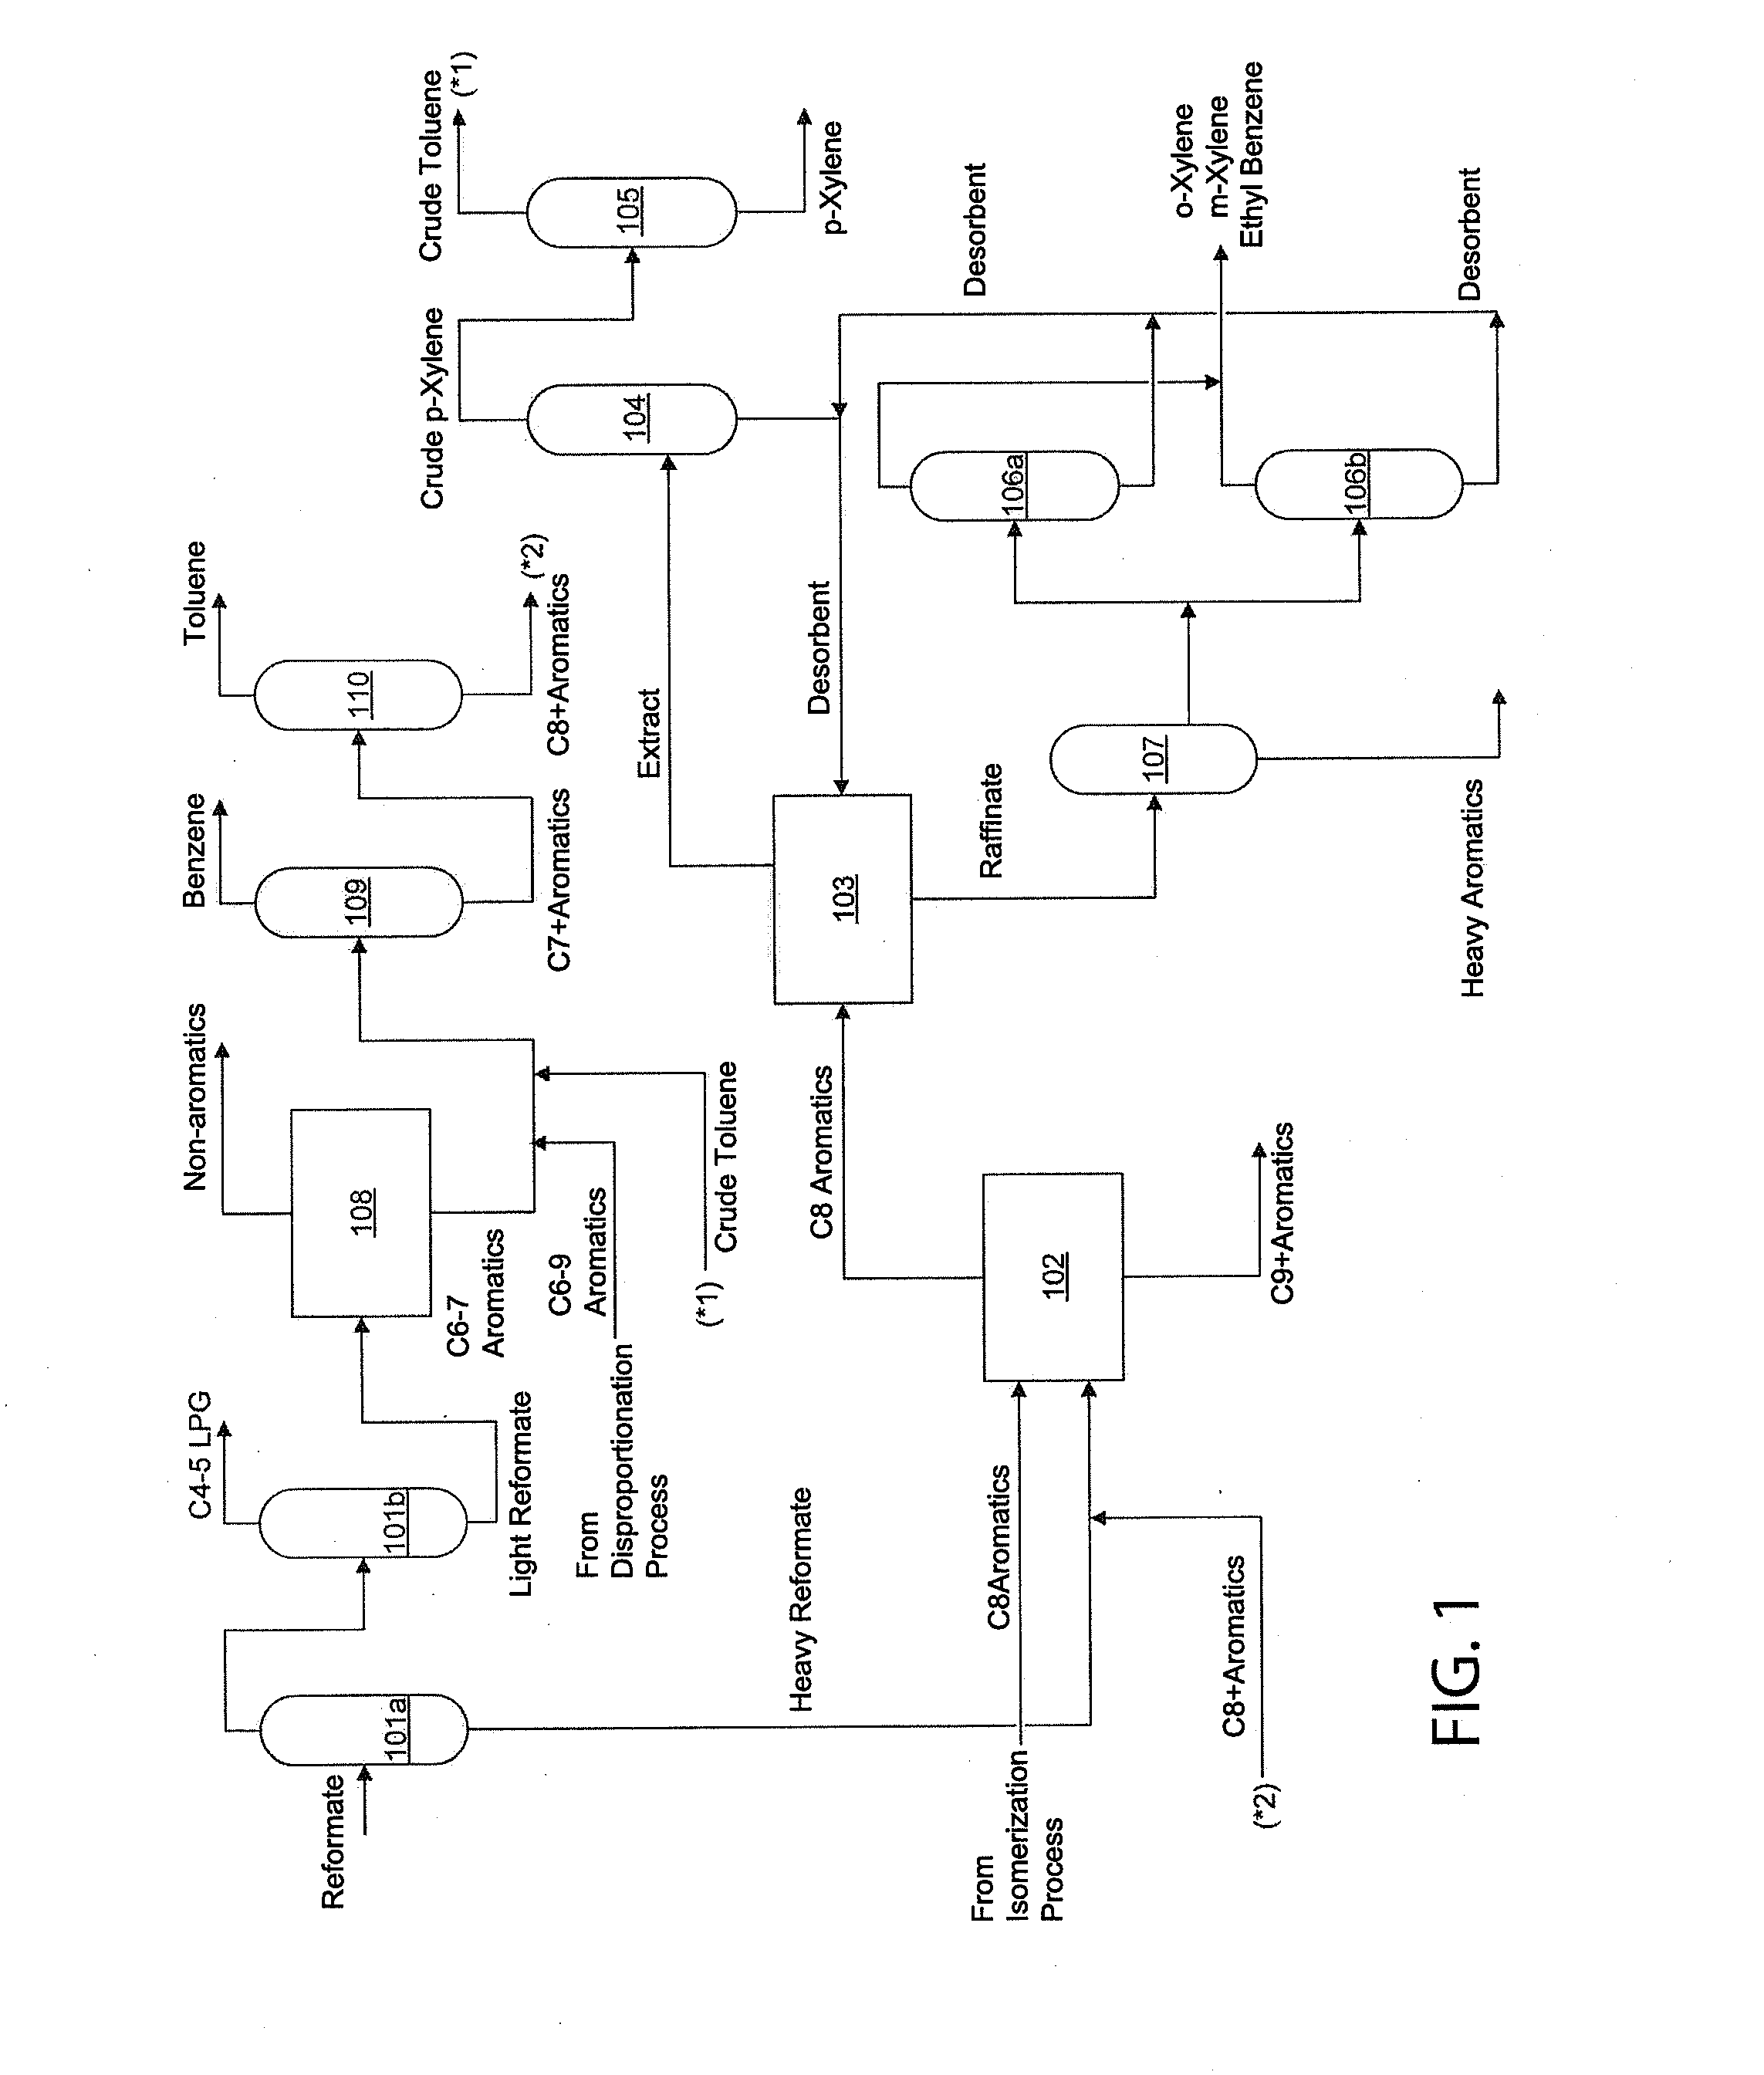 Aromatic hydrocarbon production apparatus